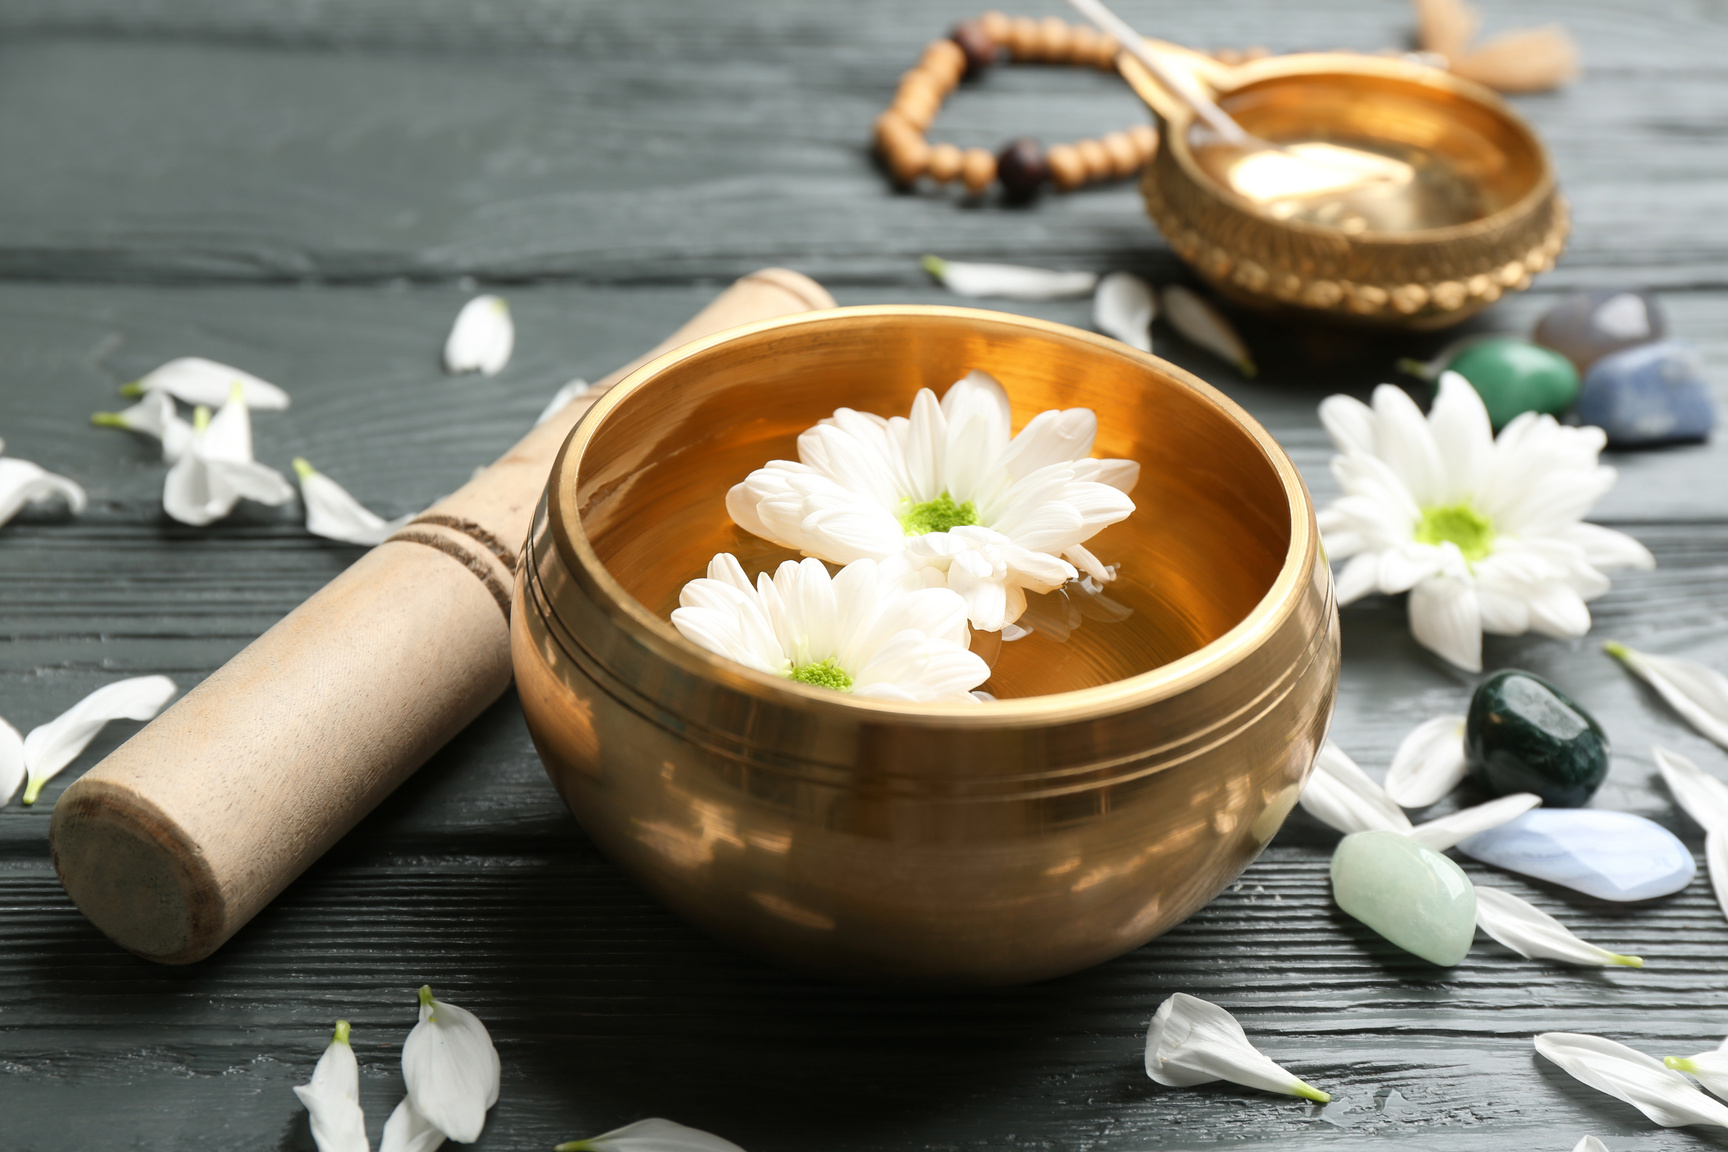 Golden Singing Bowl with Flowers and Mallet on Grey Wooden Table, Closeup. Sound Healing